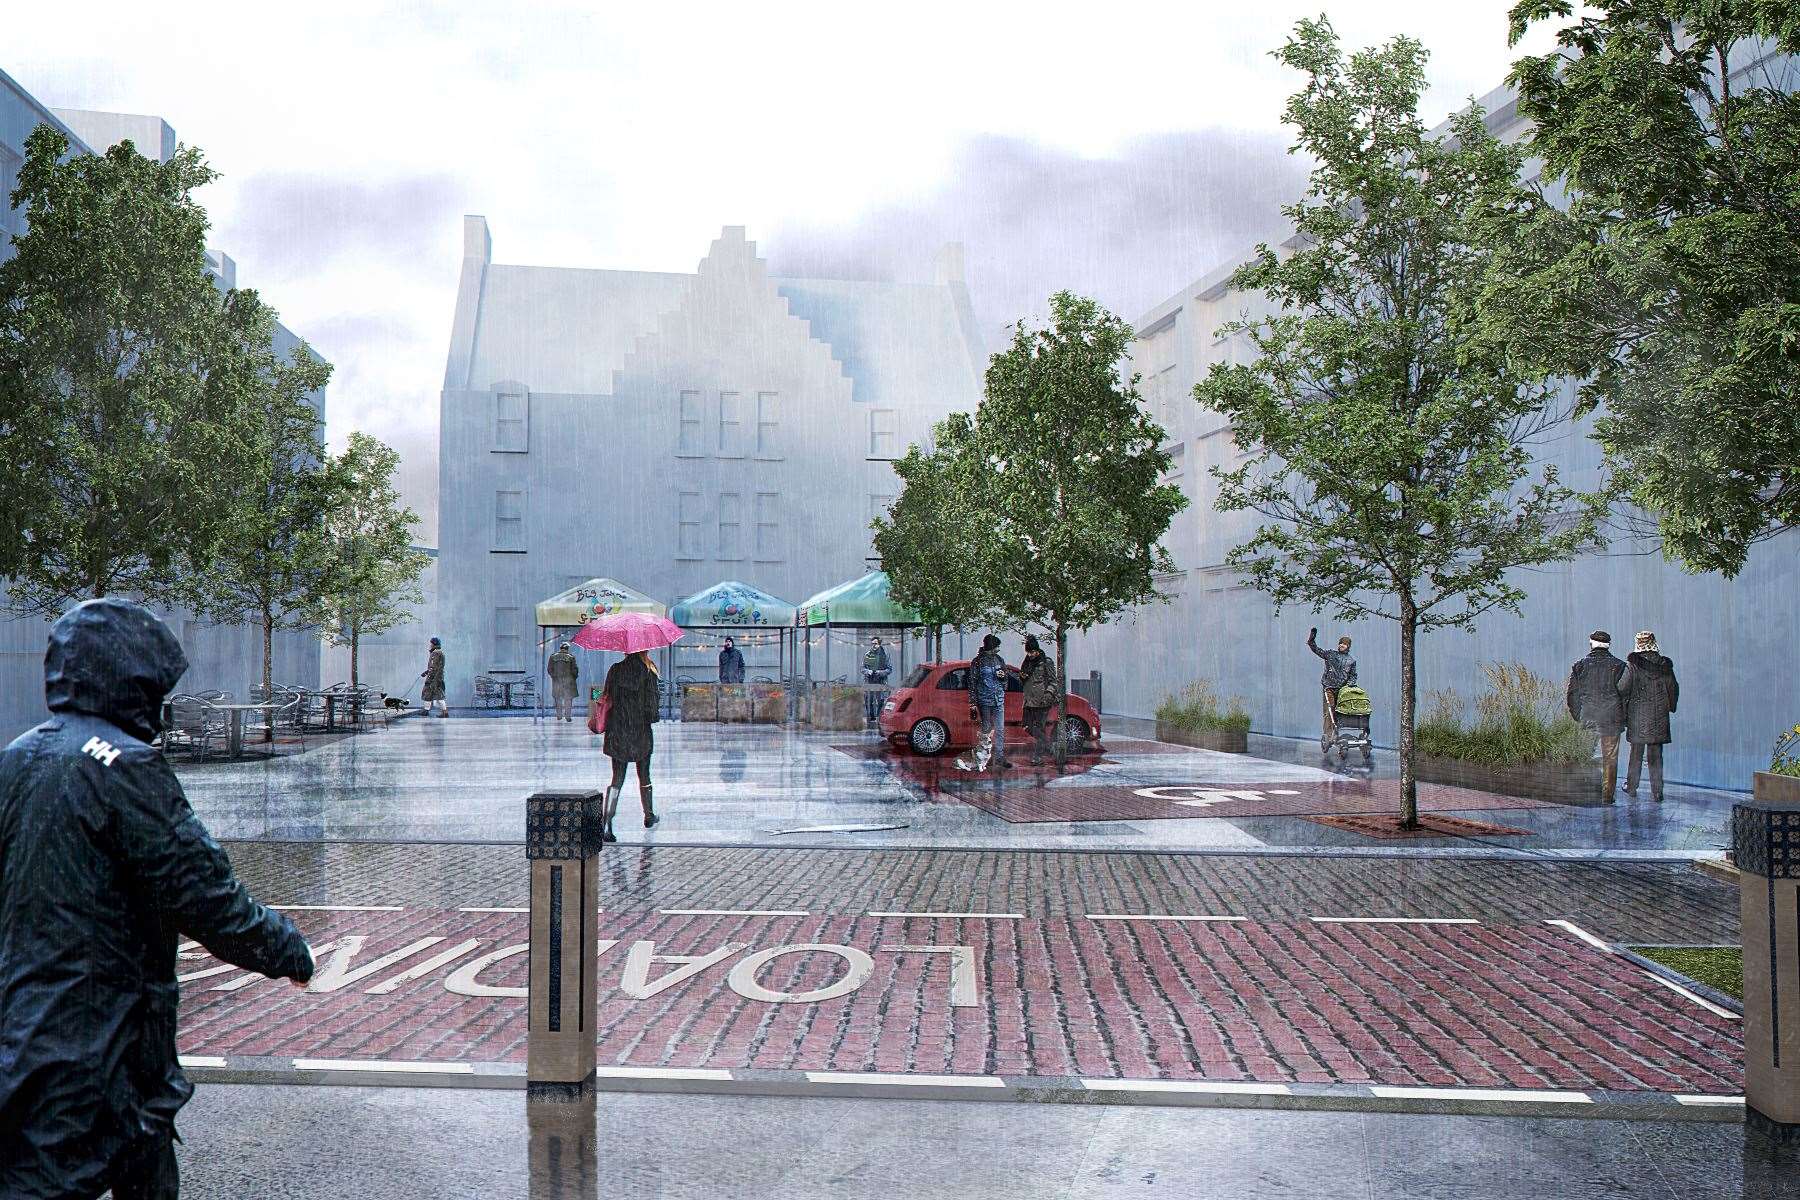 A visualisation showing Market Square, part of the series of Wick street design ideas. Image: Sustrans Scotland.